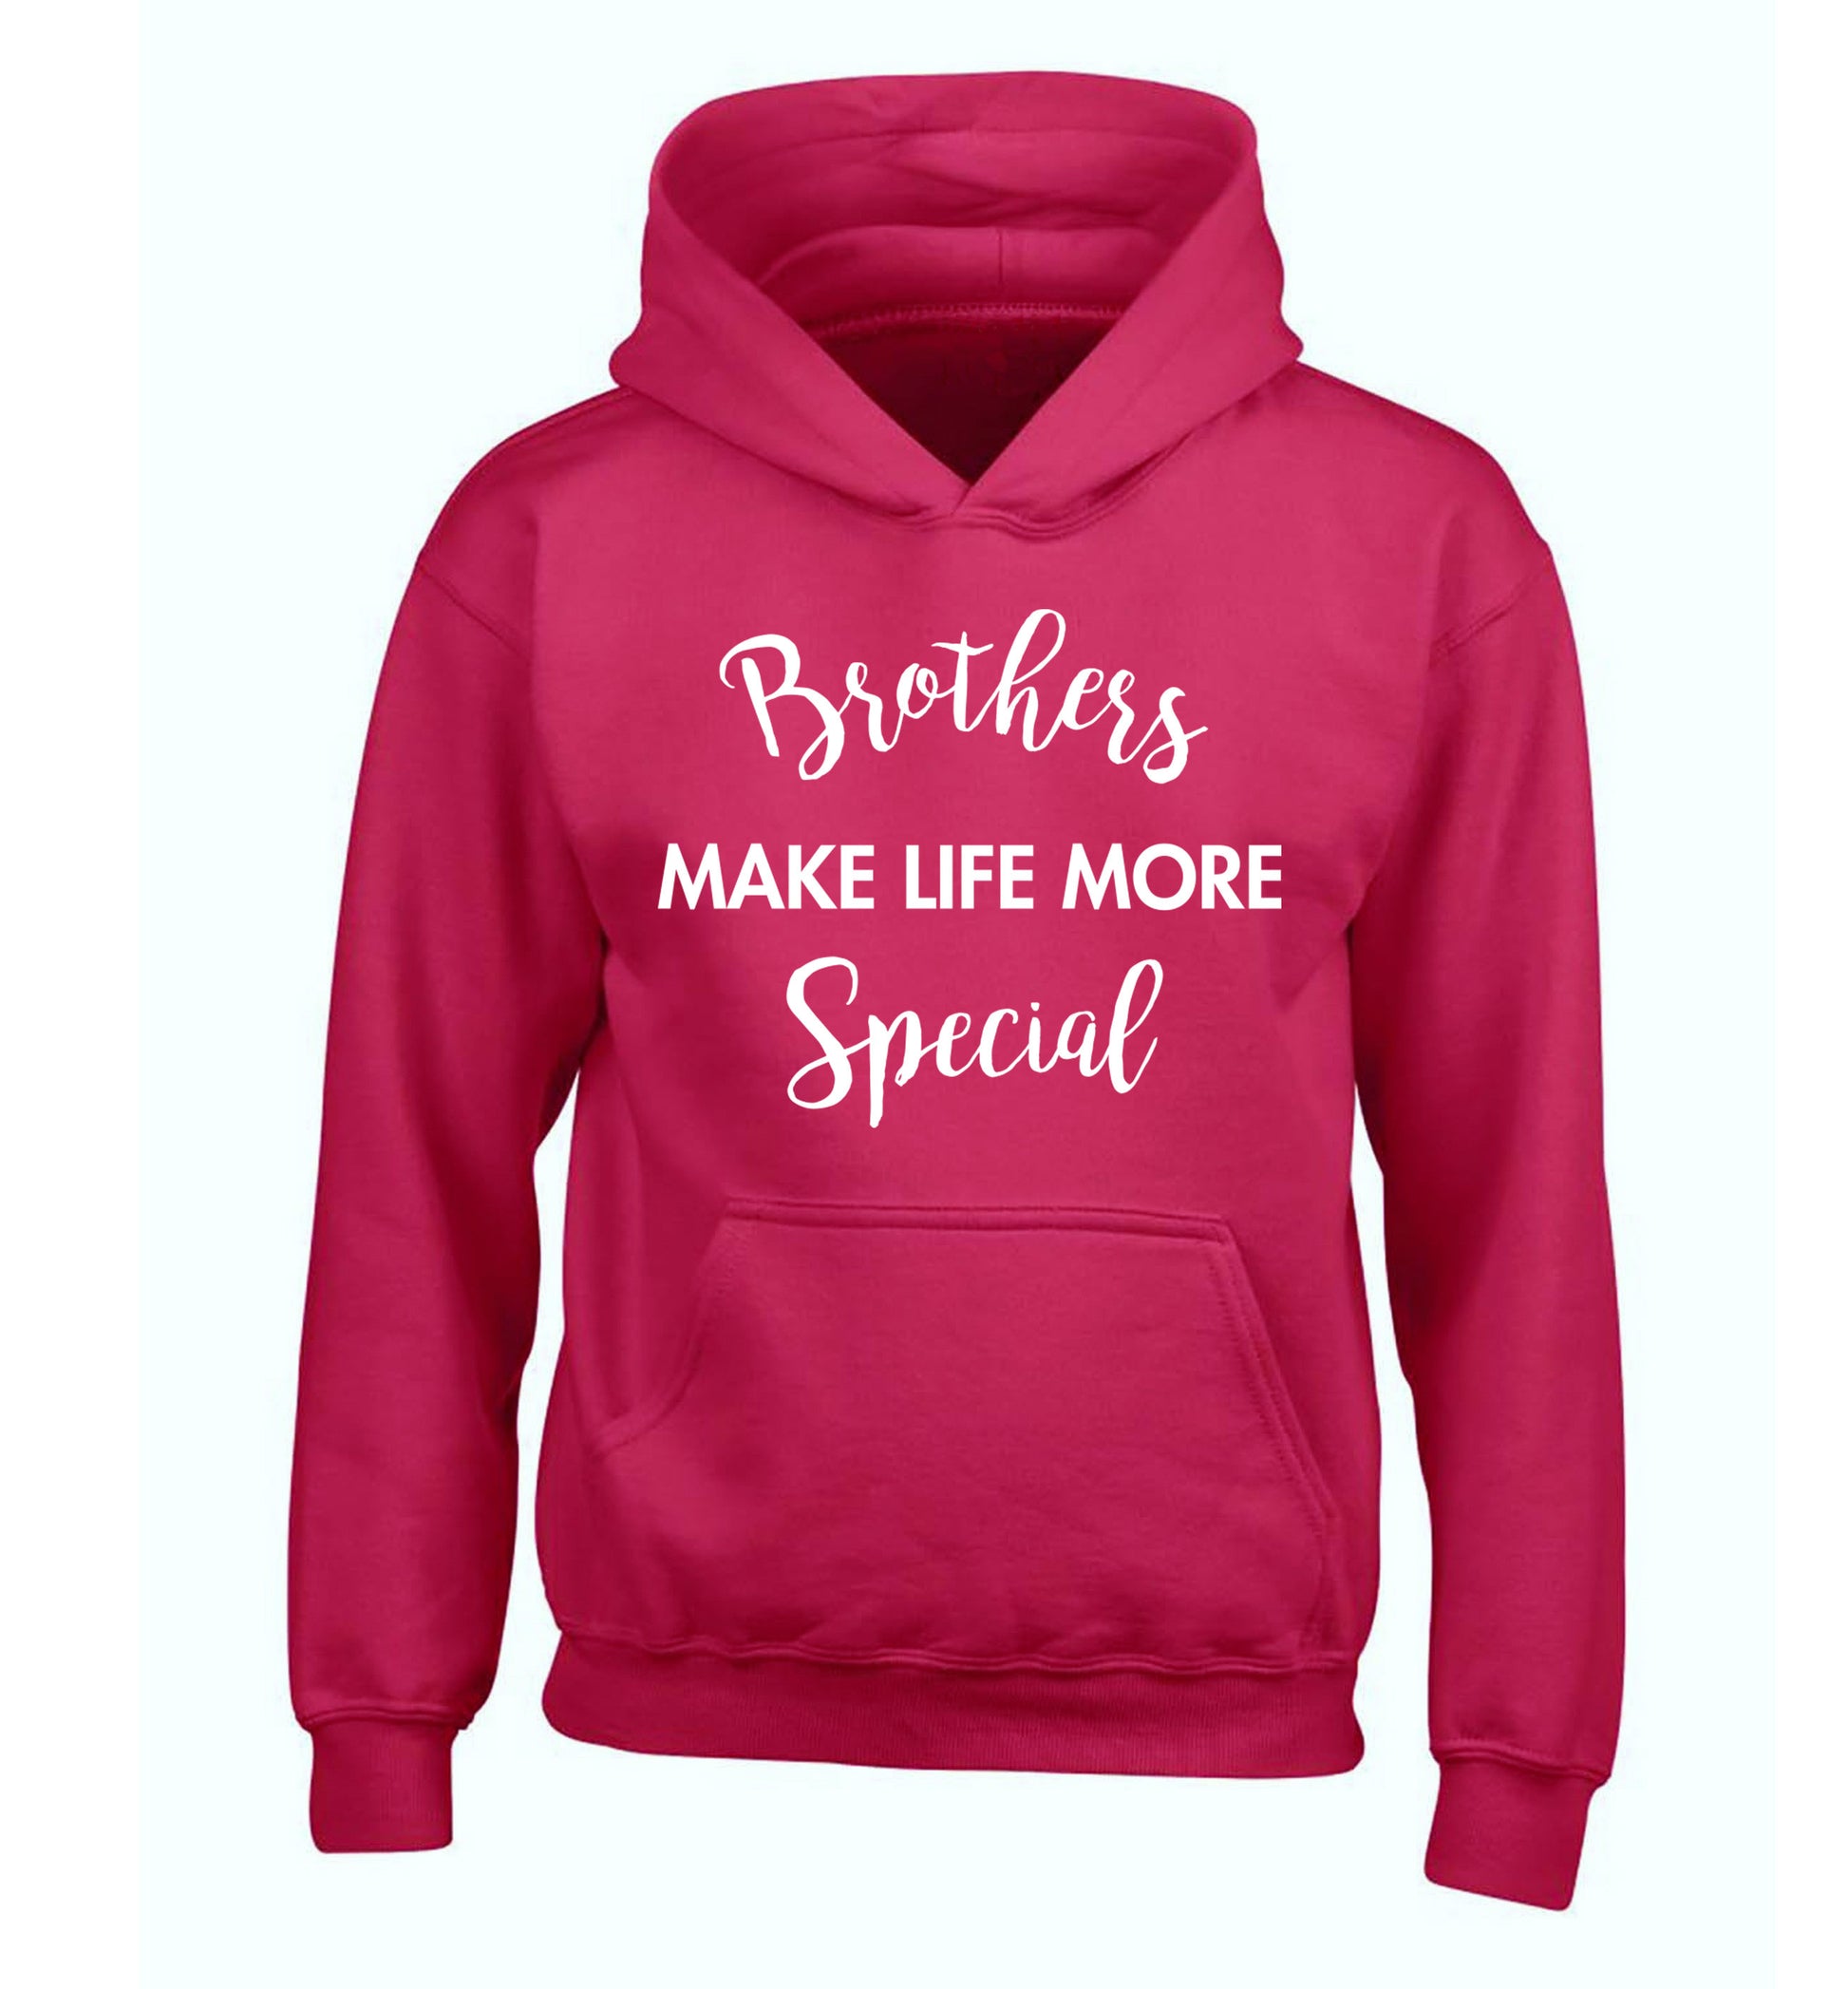 Brothers make life more special children's pink hoodie 12-14 Years